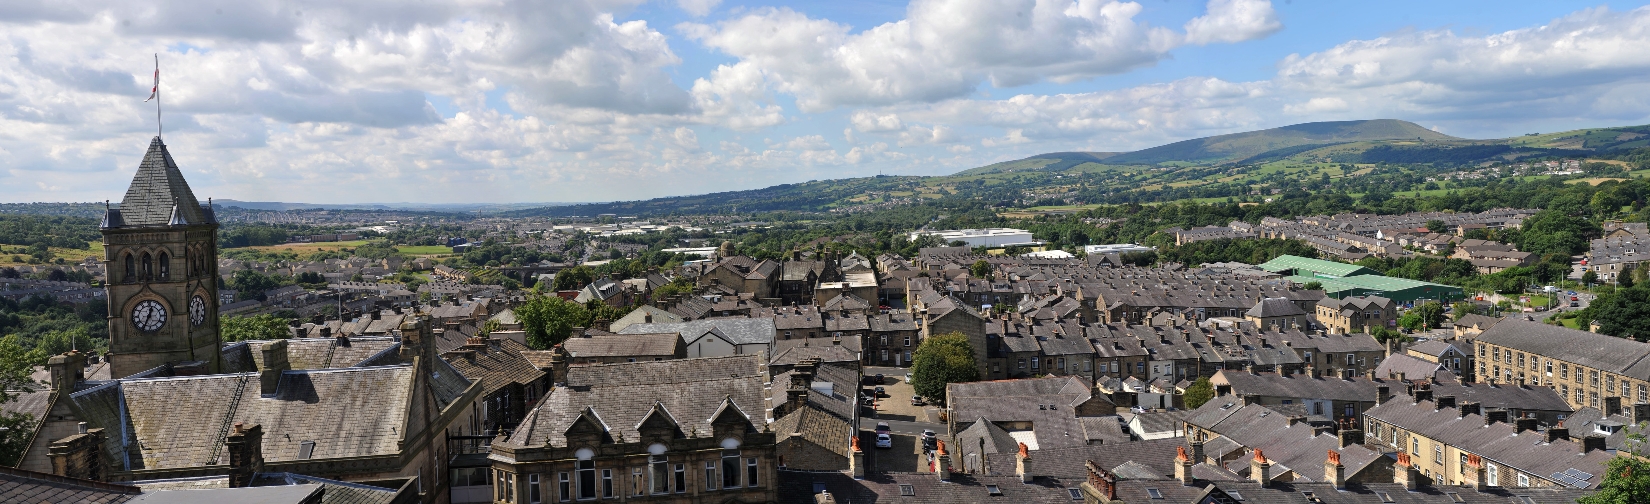 Have Your Say on Colne’s Future 